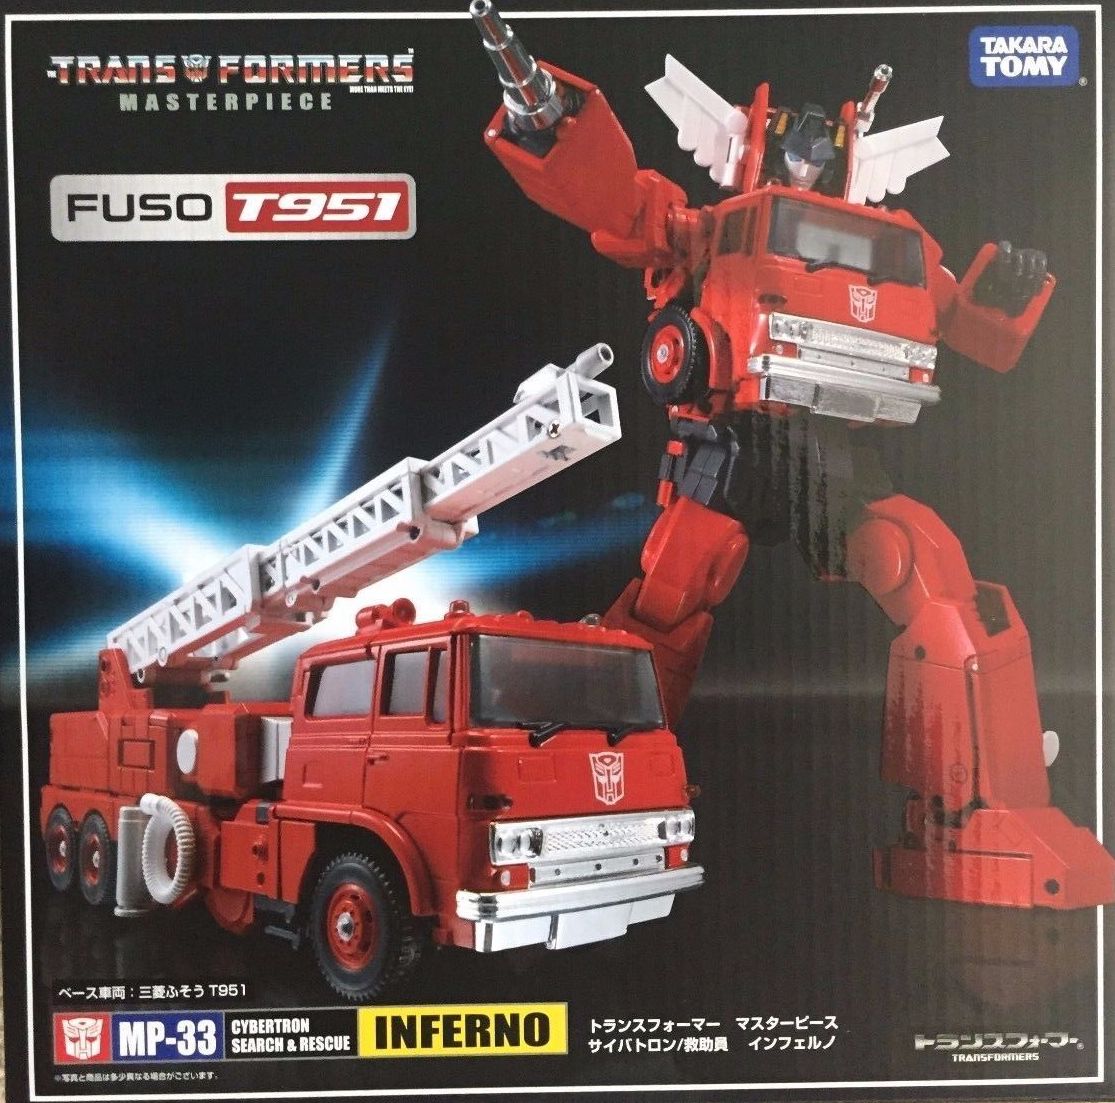 Masterpiece MP-33 Inferno FUSO T951 Transformers Action Figure KO Toy 